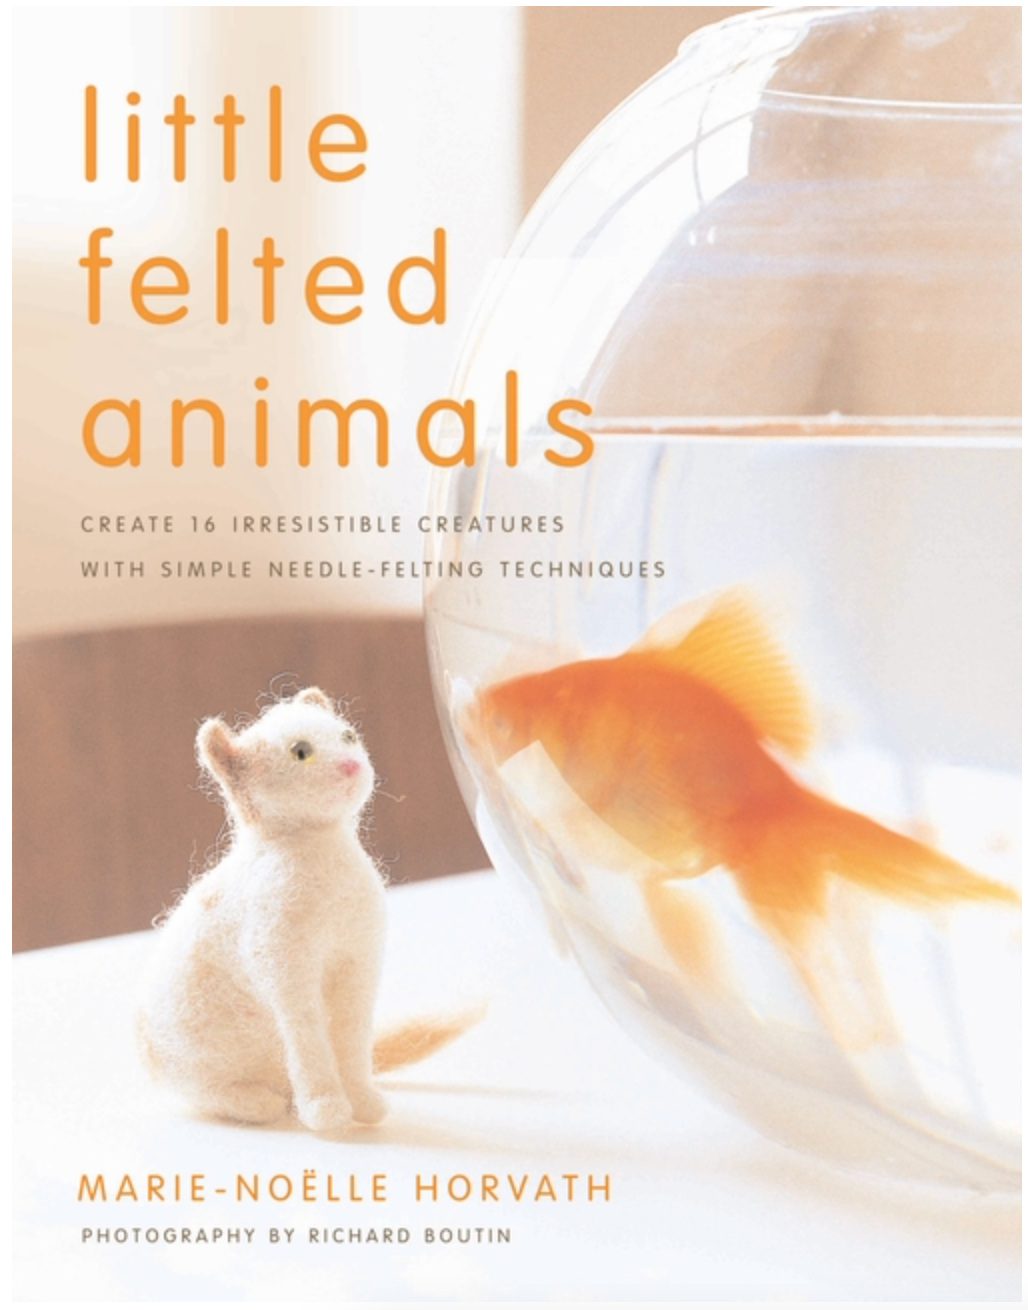 Little Felted Animals by Marie-Noelle Horvath